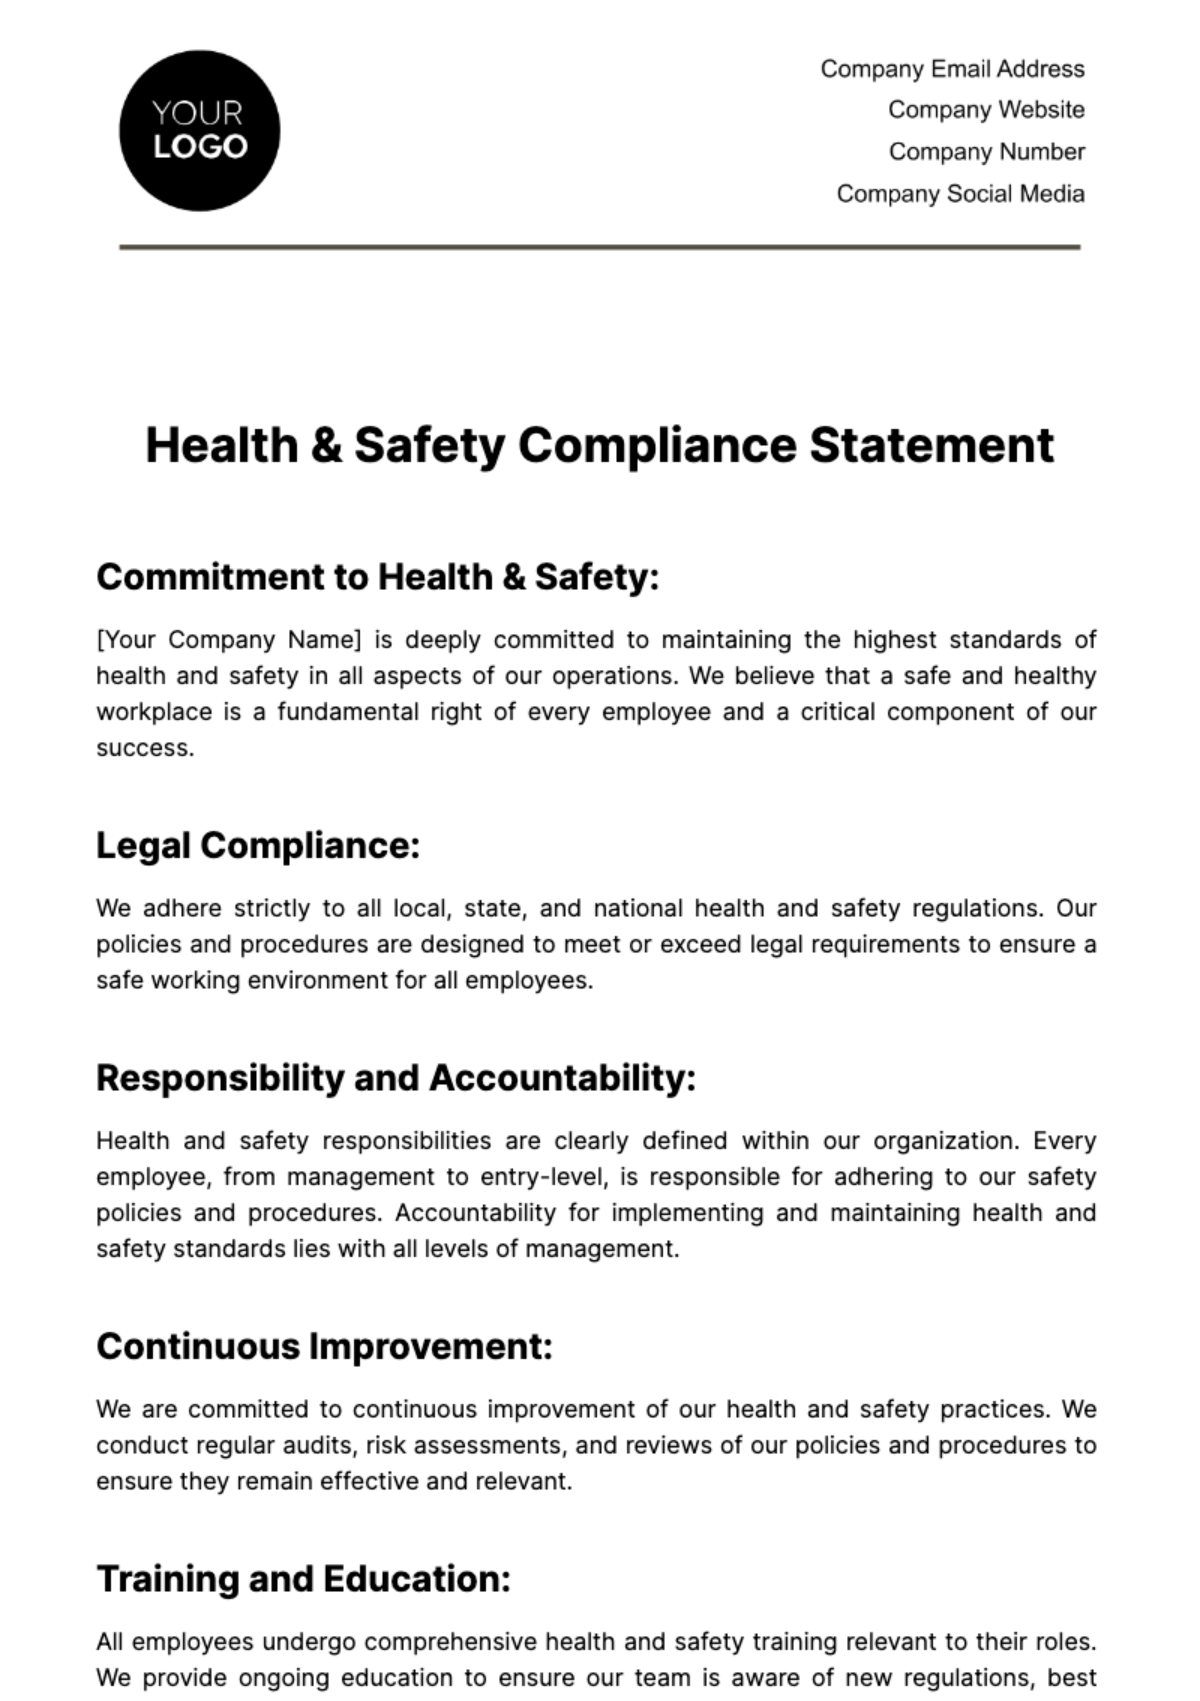 Free Health & Safety Compliance Statement Template